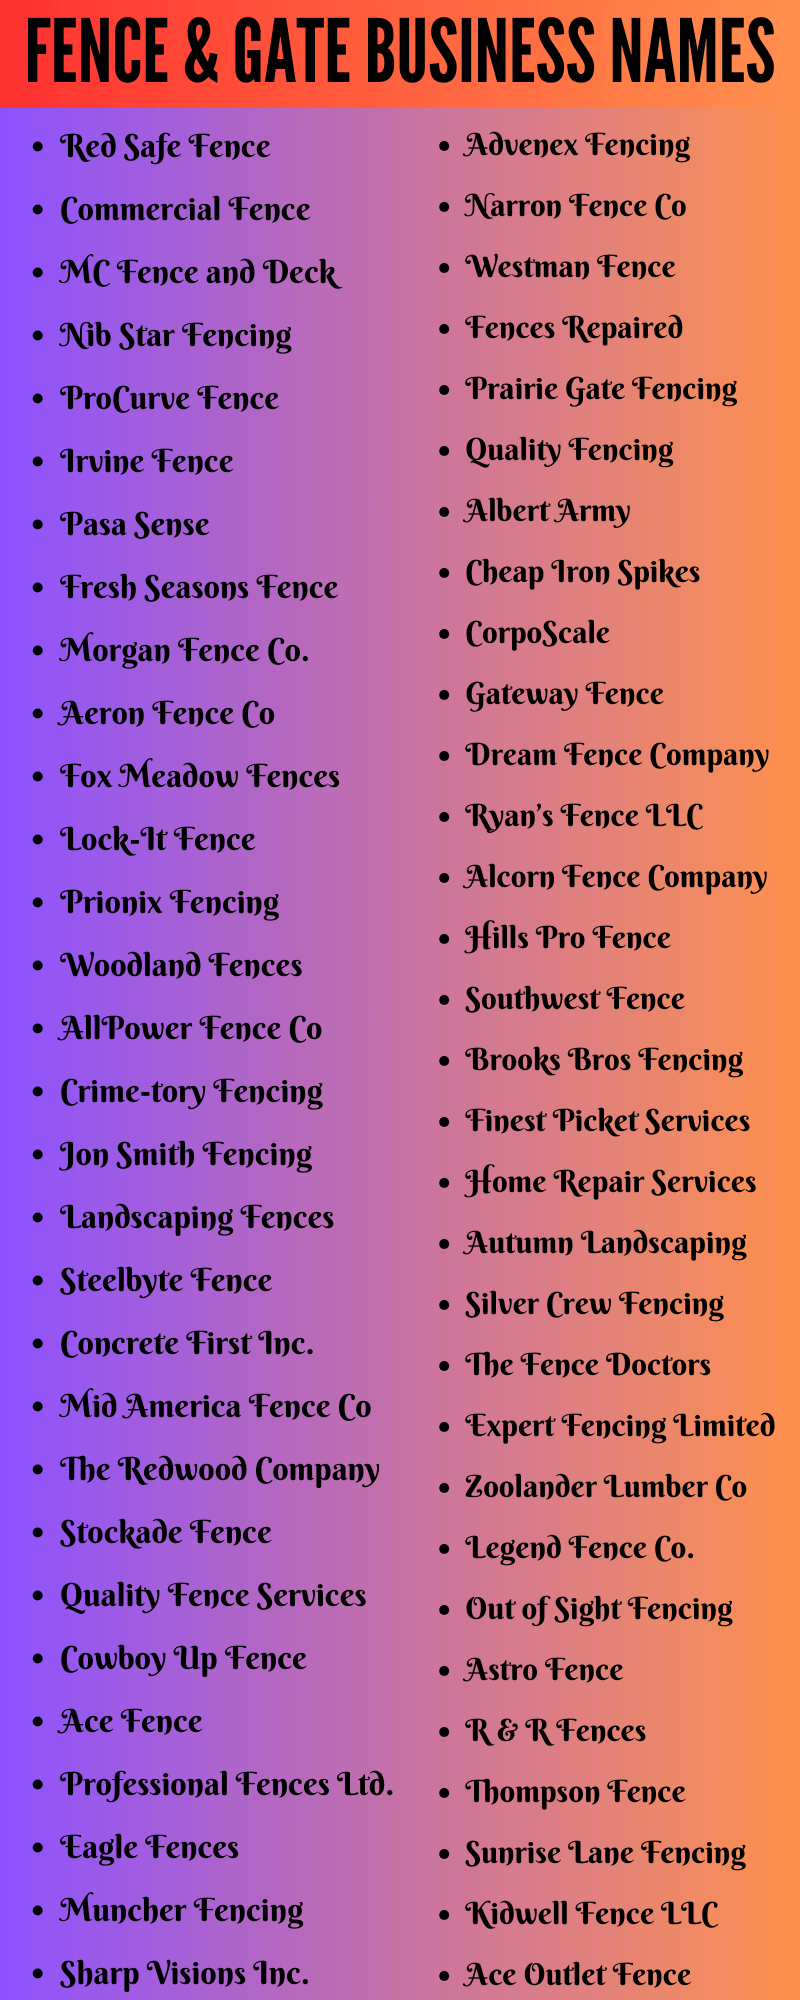 Fence & Gate Business Names